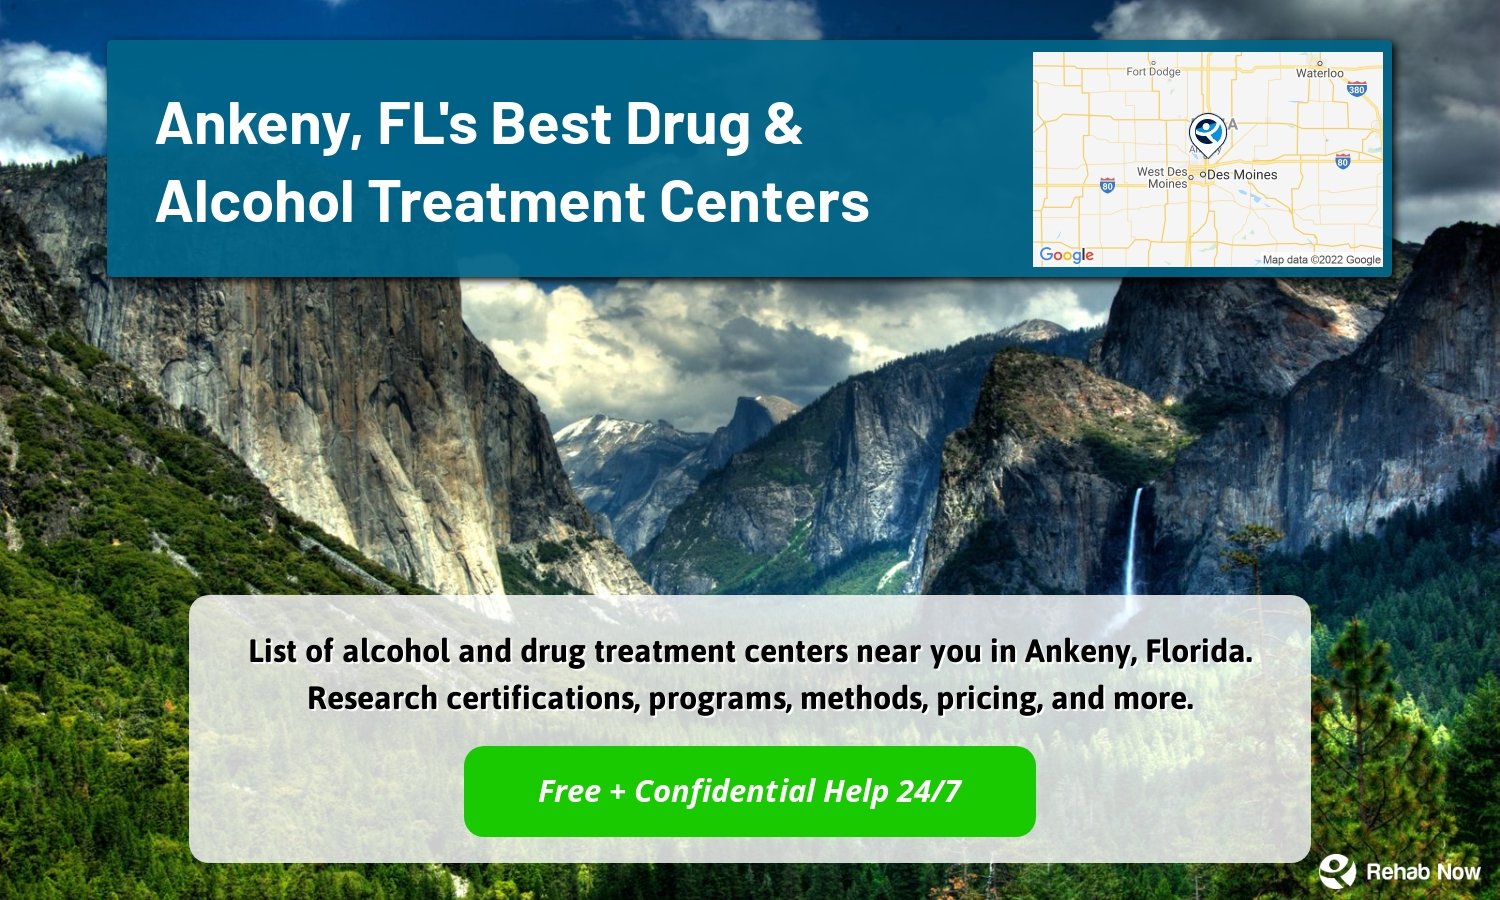 List of alcohol and drug treatment centers near you in Ankeny, Florida. Research certifications, programs, methods, pricing, and more.